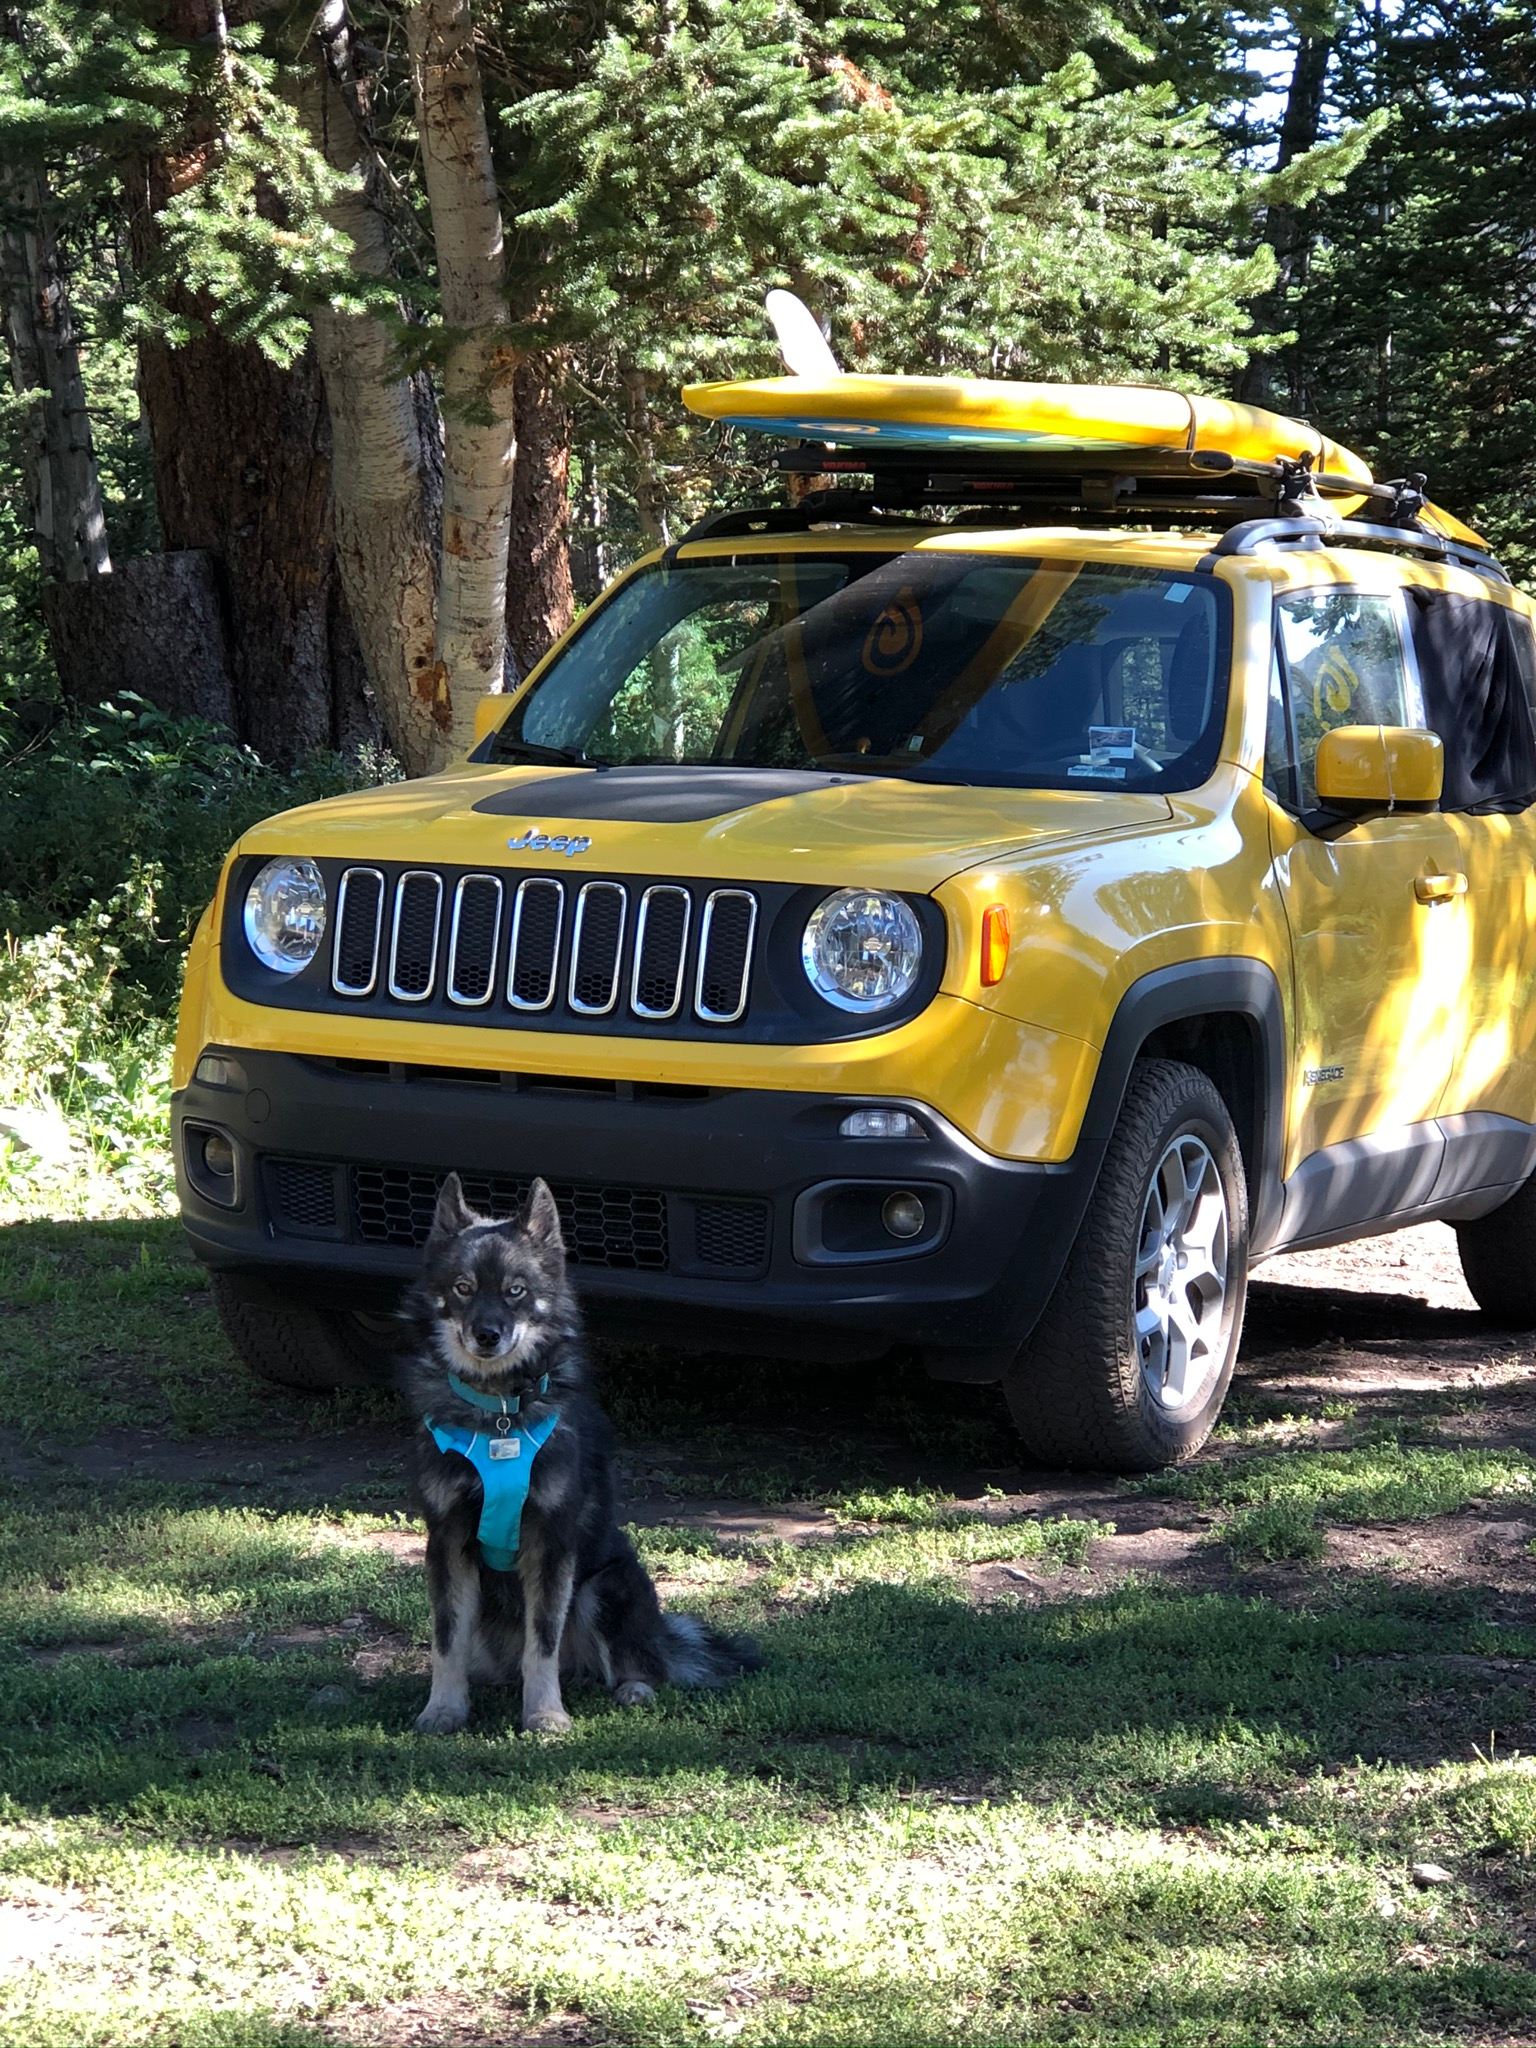 A stand up paddle board in this set up takes up a lot of realestate on the jeep. Ekko waiting for his paddle board to be unloaded.